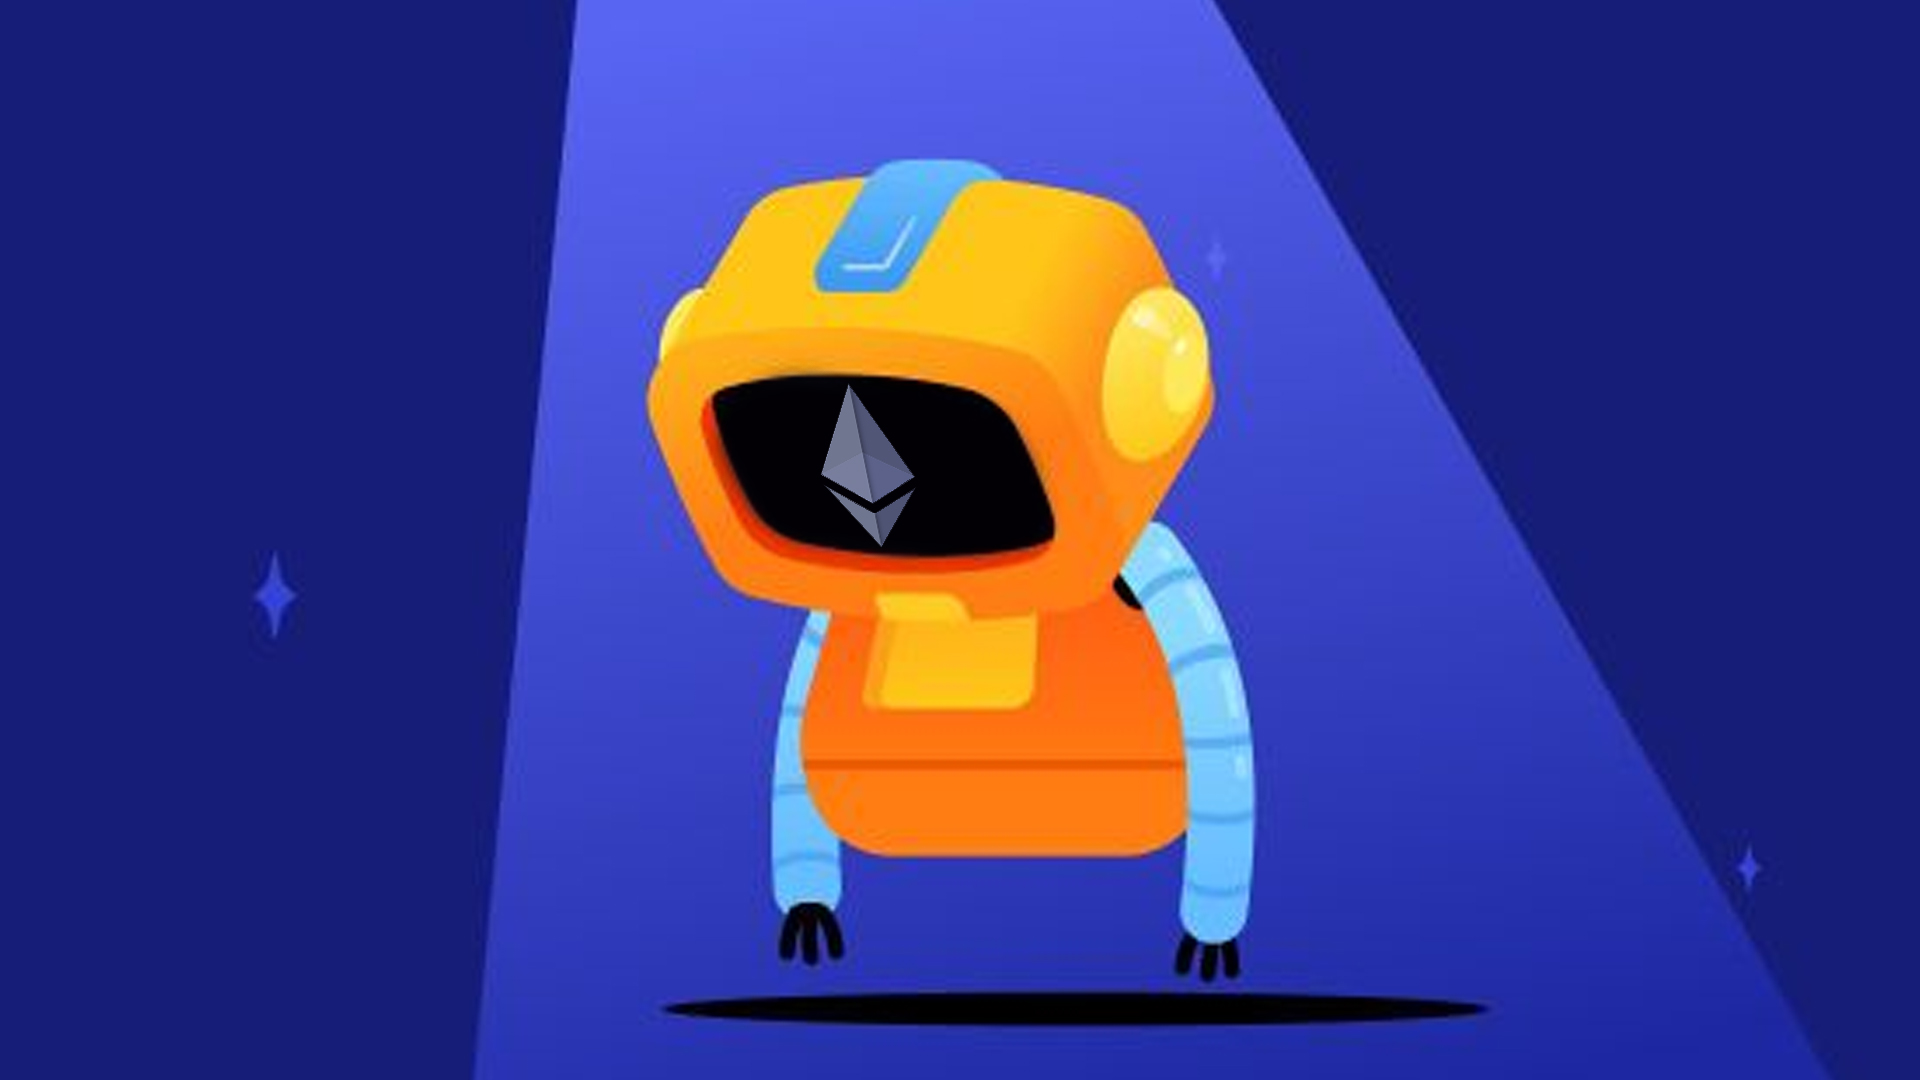 A sad robot in Discord's logo illustration style, whose face is displaying an Ethereum symbol.